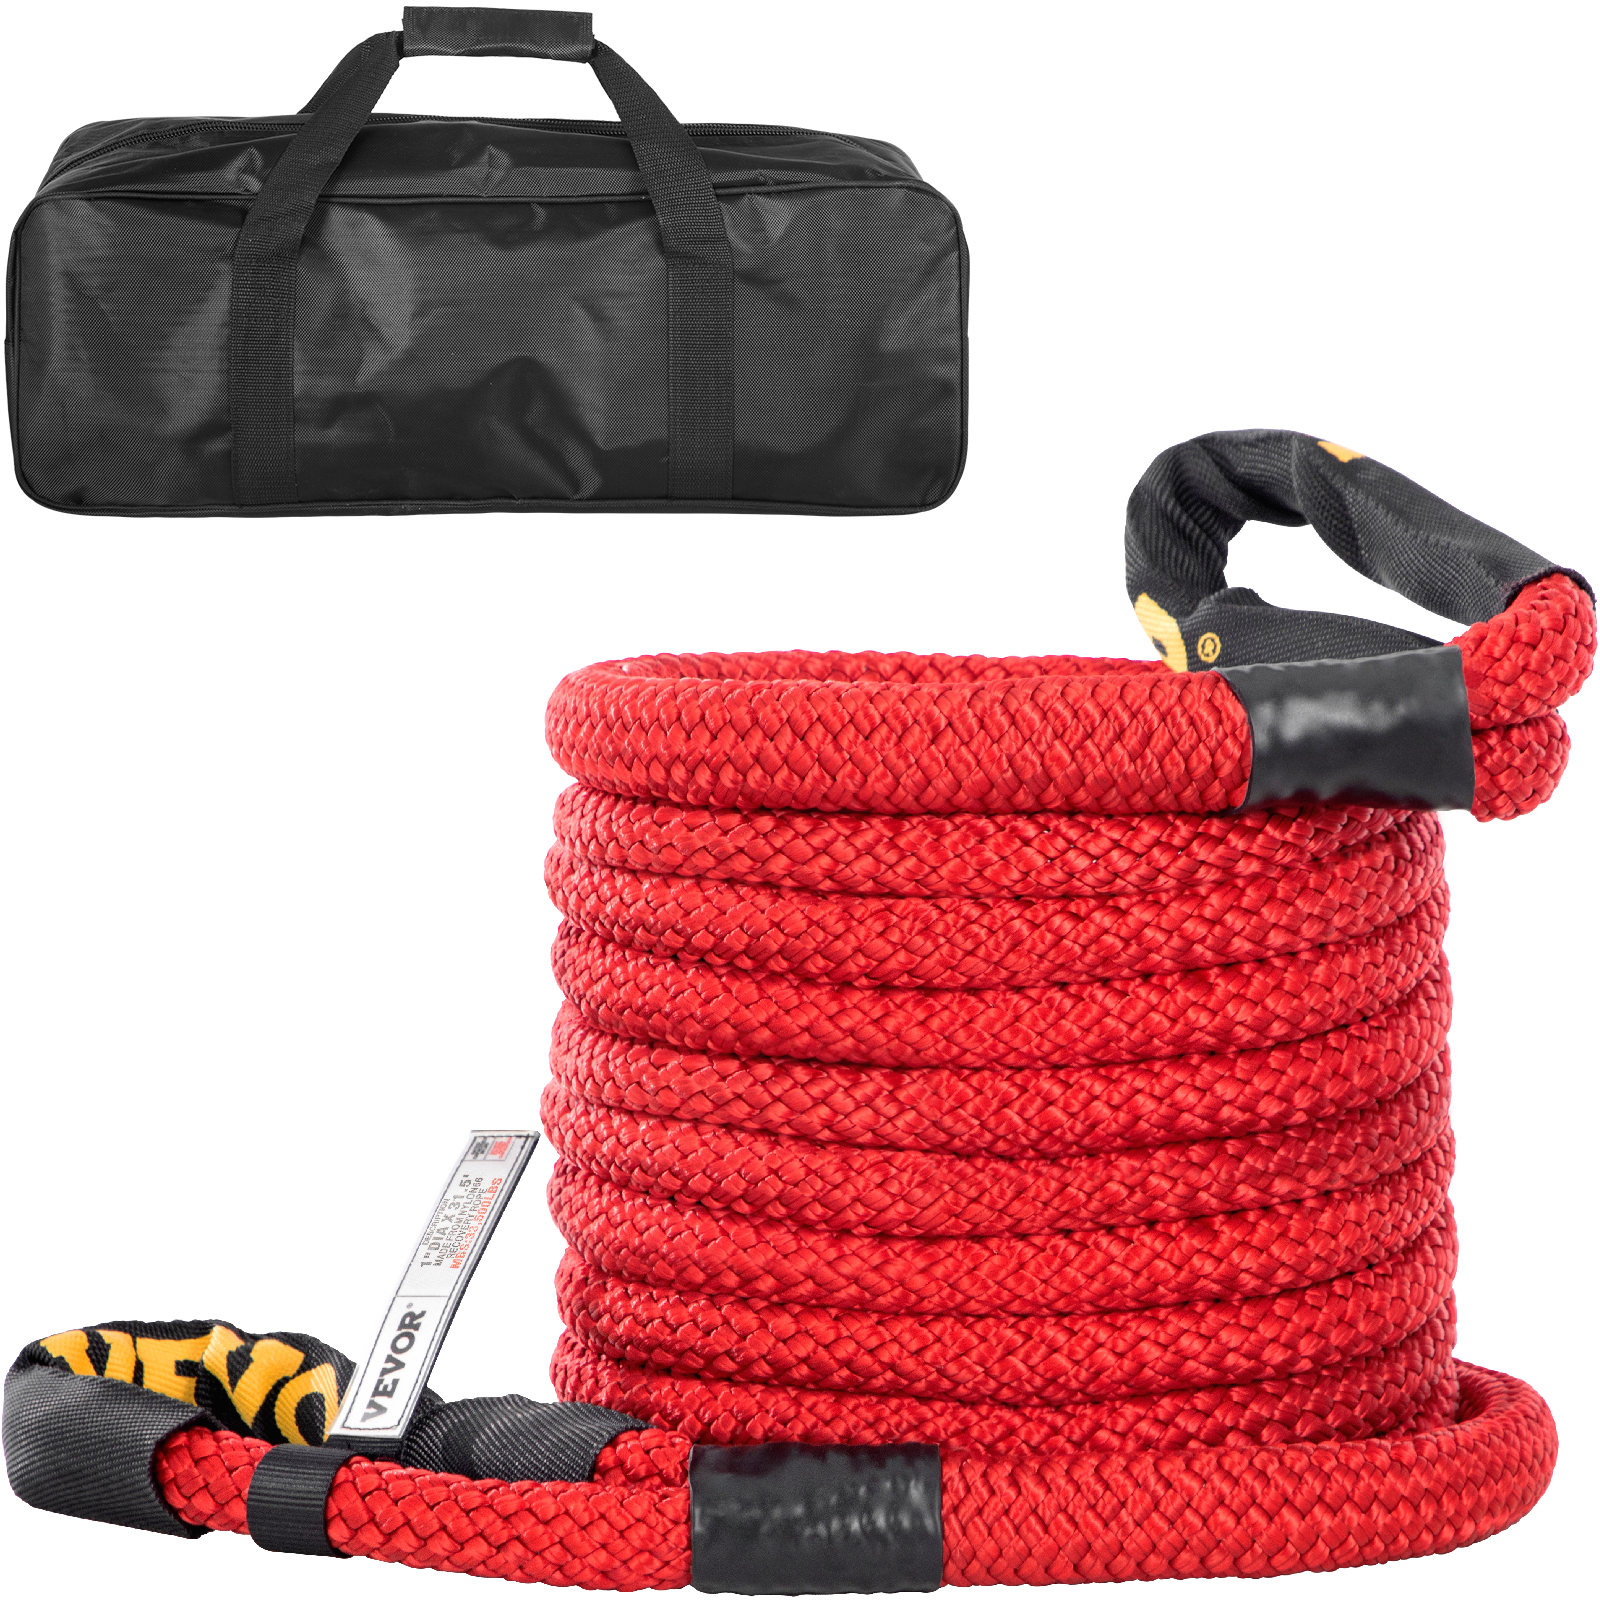 5/8 x 15' Braided Tow Rope with Safety Hooks: 6,000 lbs Strength